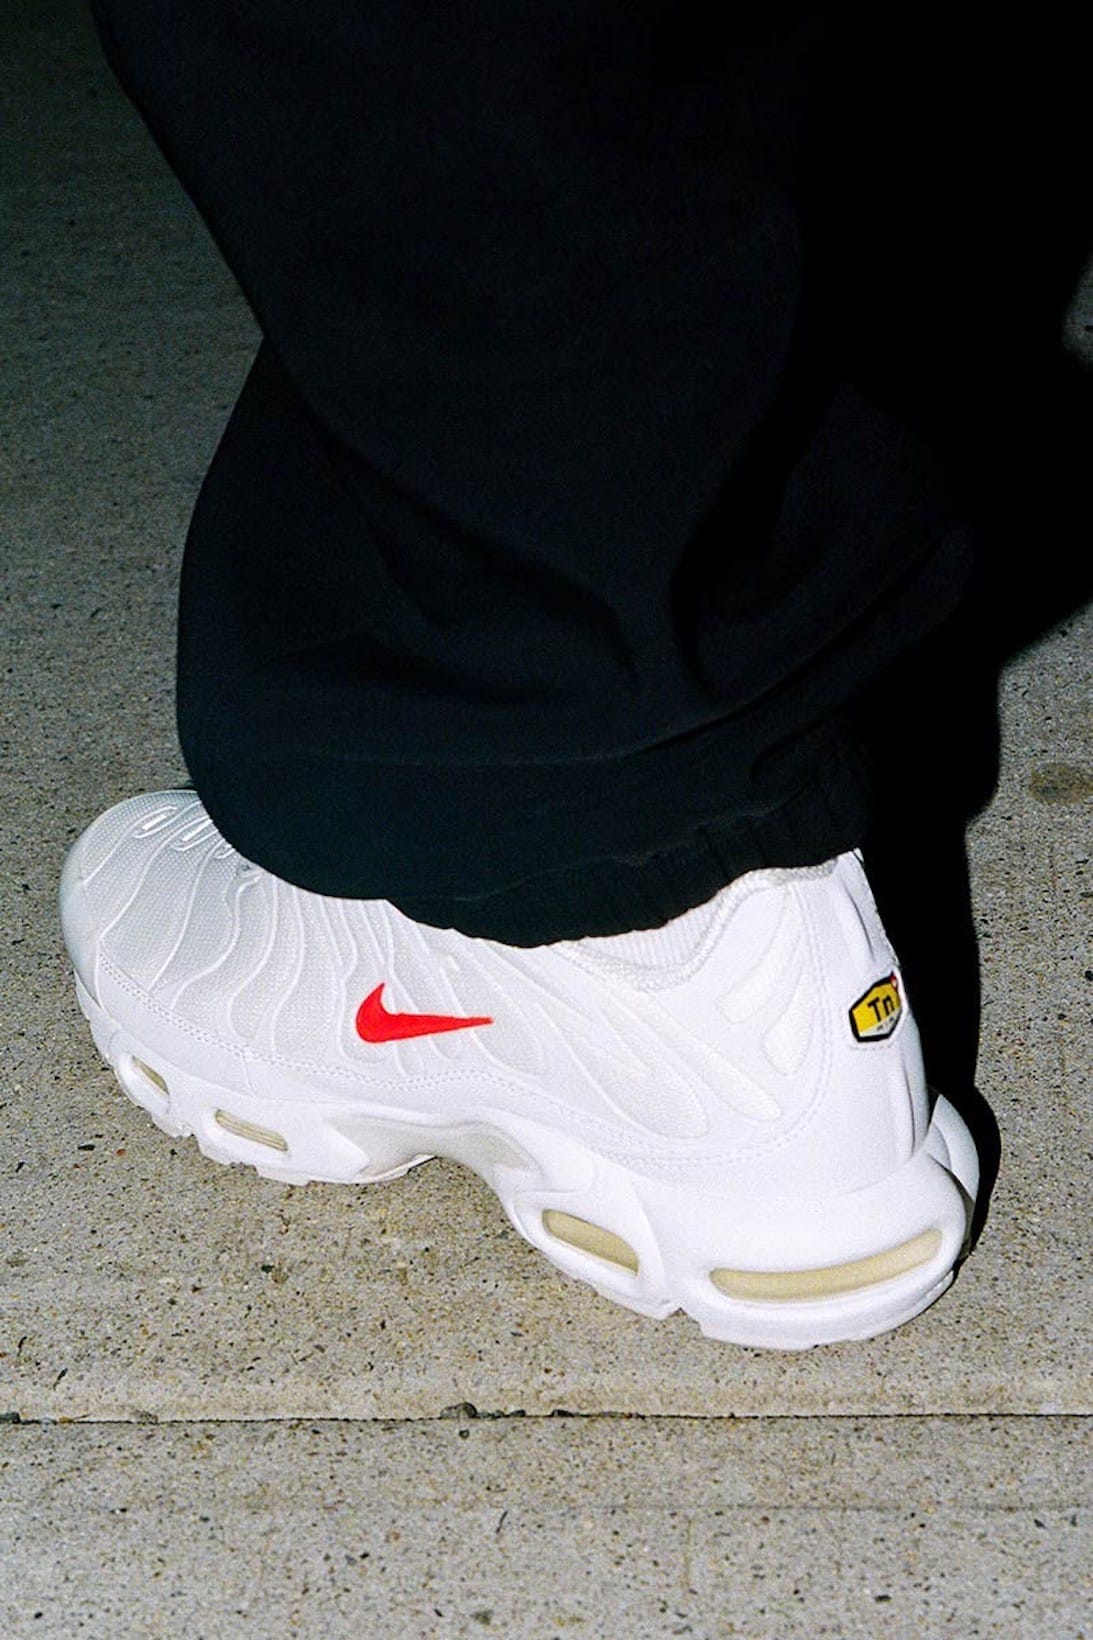 when did the air max plus come out